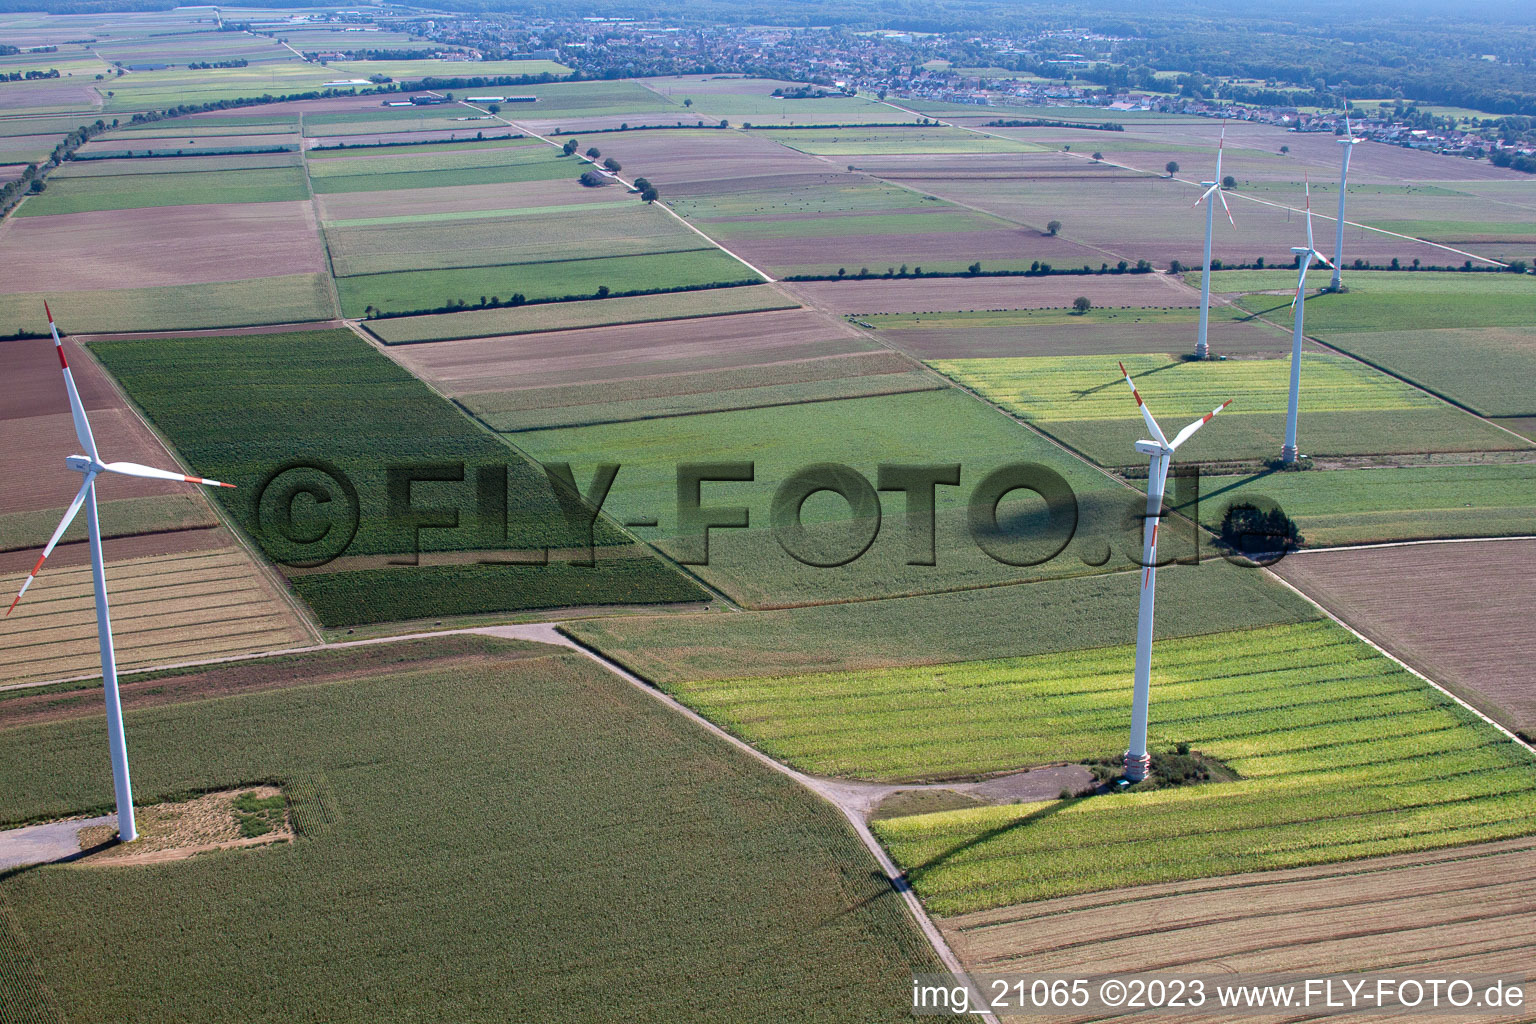 Wind turbines in Minfeld in the state Rhineland-Palatinate, Germany from the plane